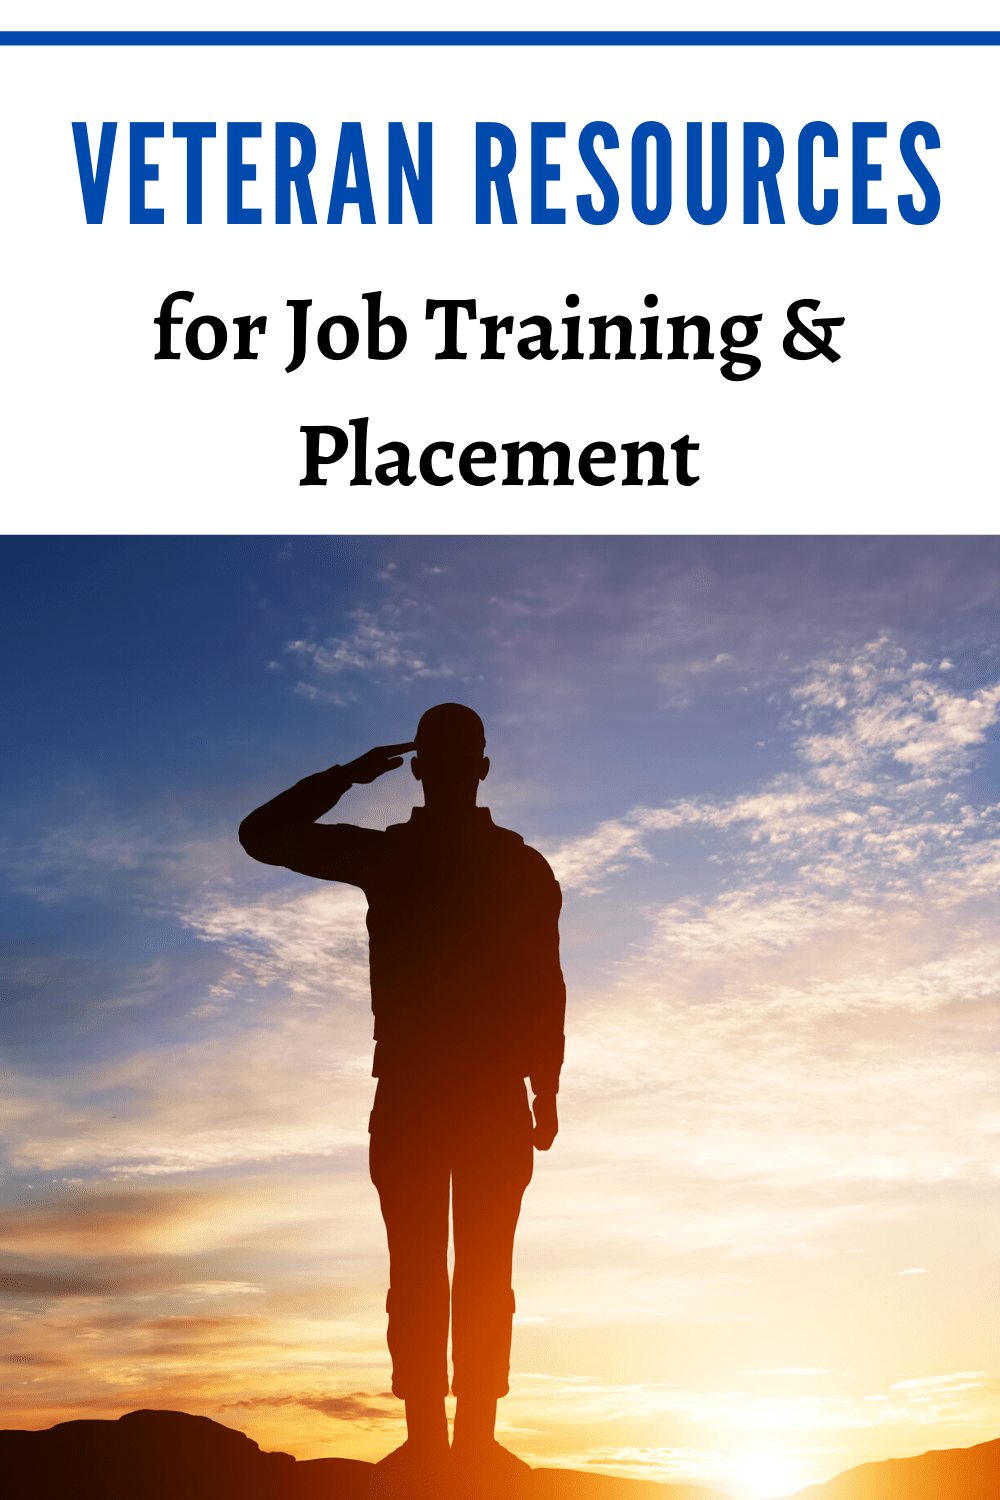 Veteran Resources for Job Training & Placement